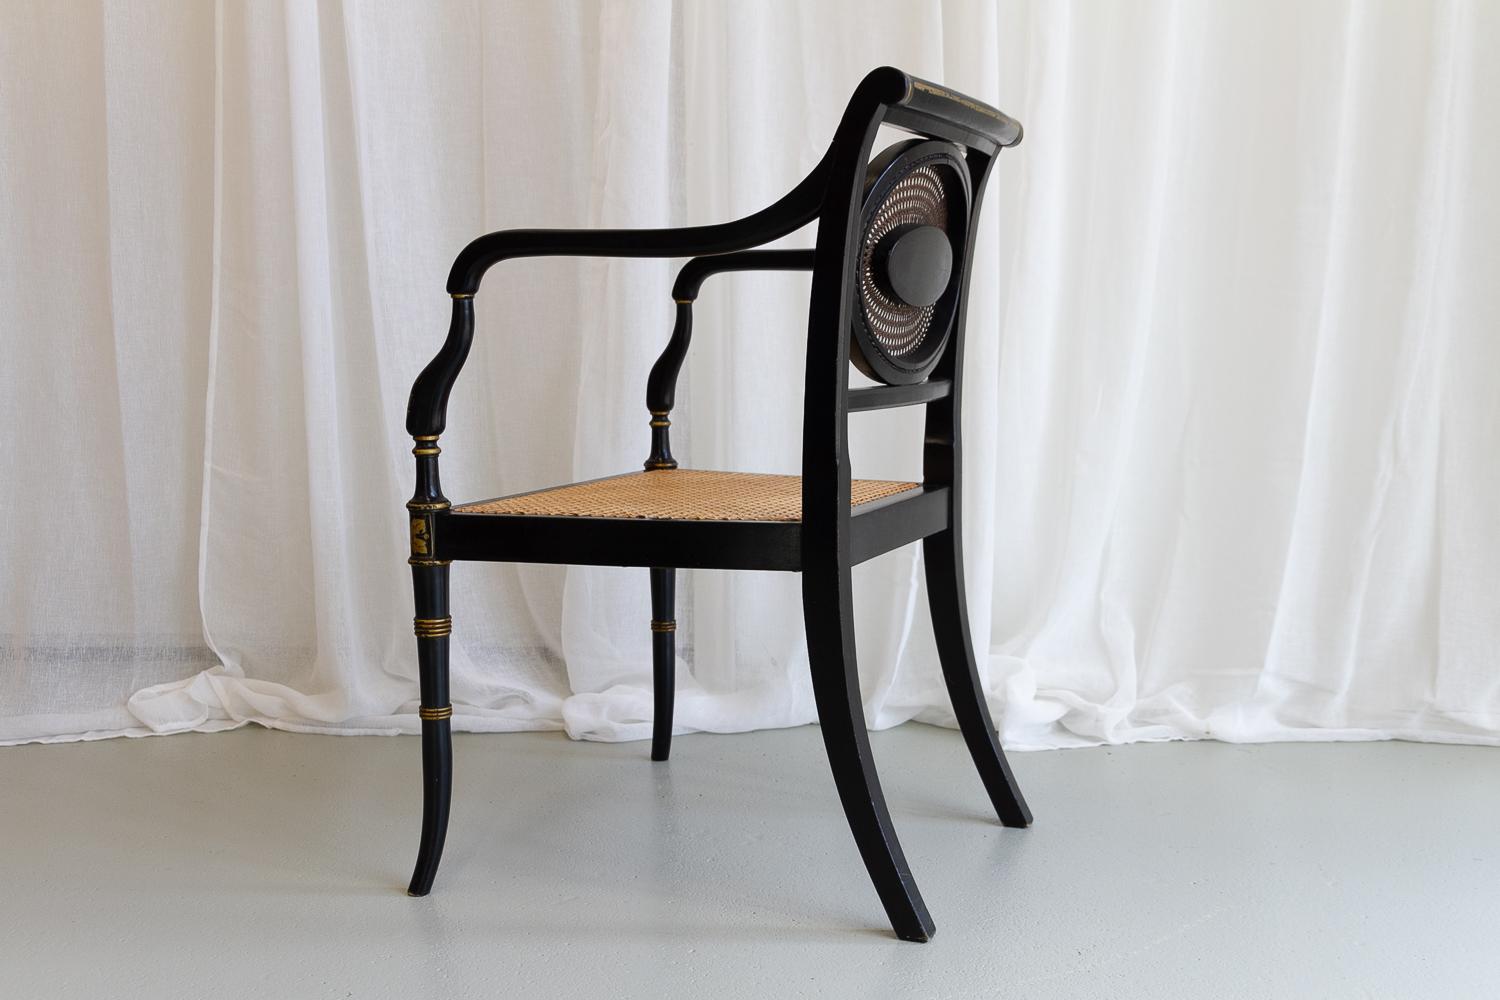 Cane English Regency Black and Gold Armchair, 19th Century. For Sale